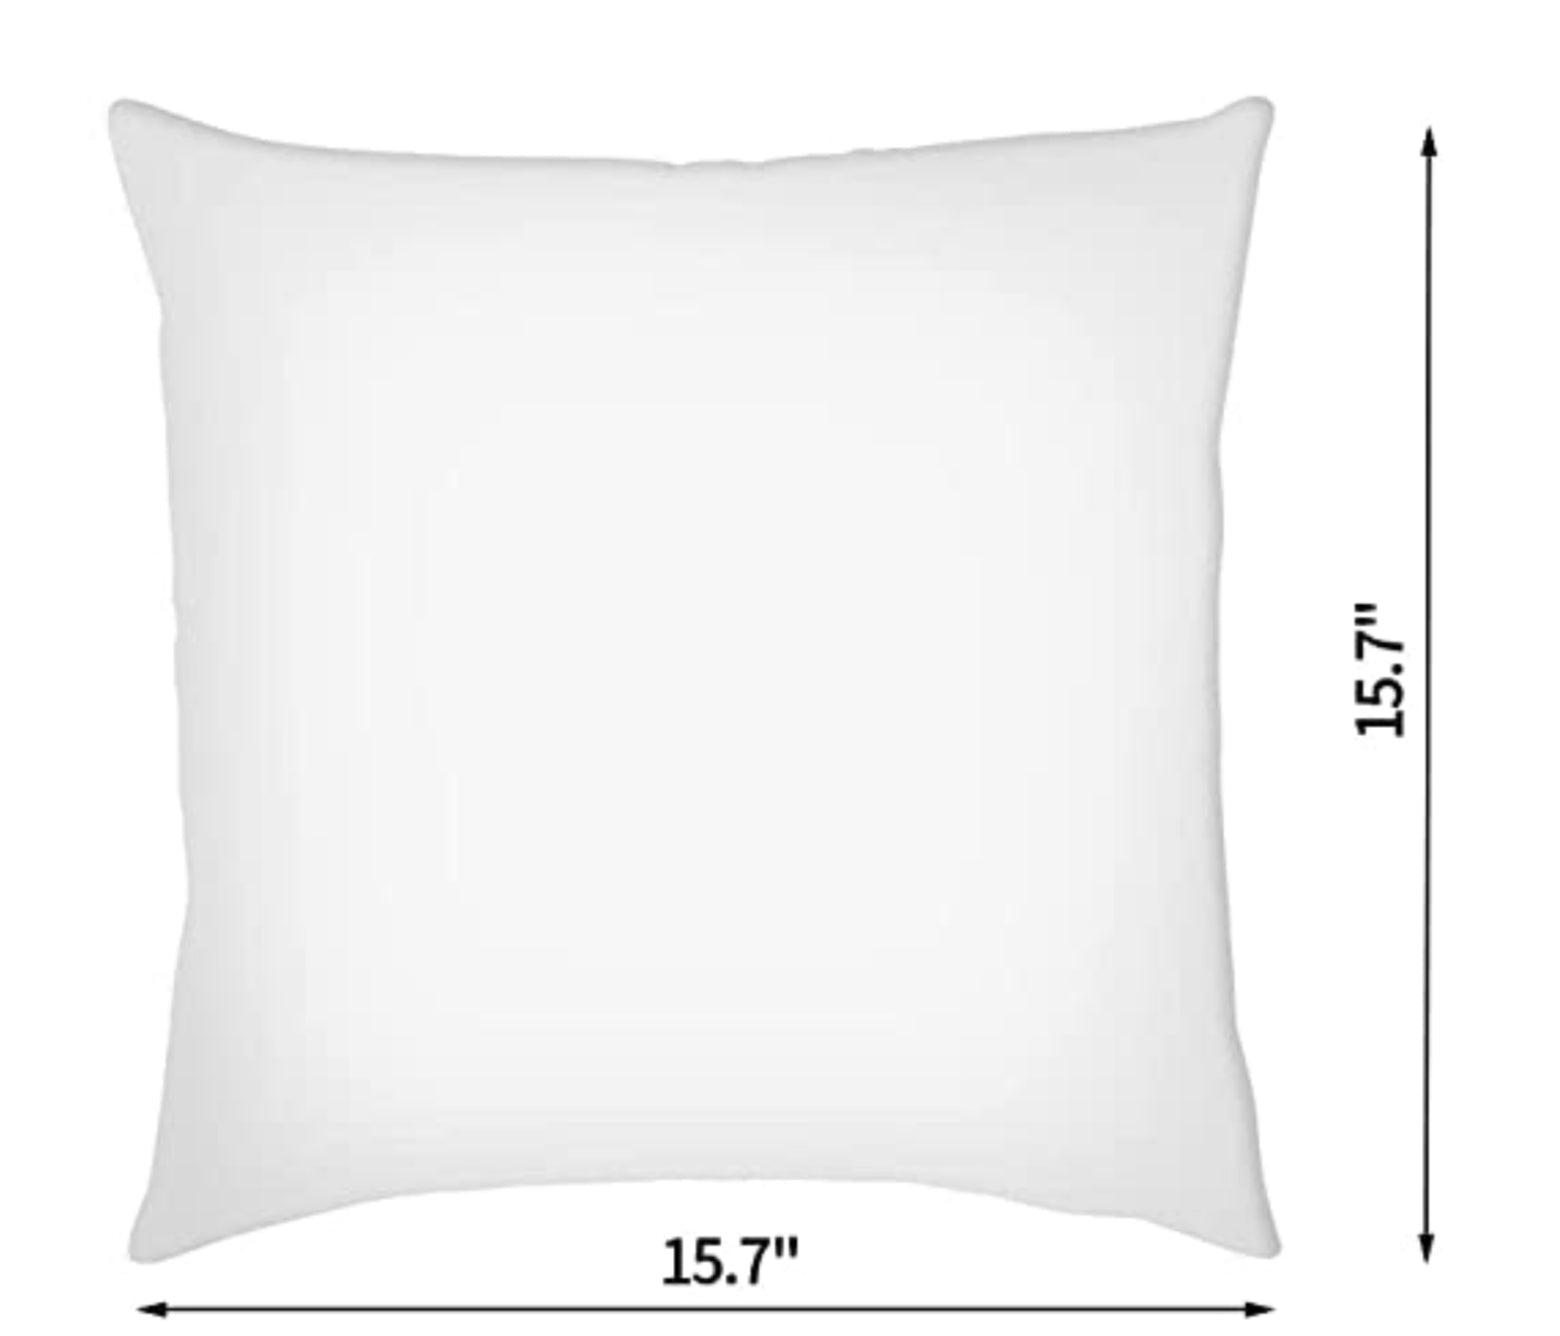 Welcome To Our Perfectly Imperfect Life - Cushion Cover